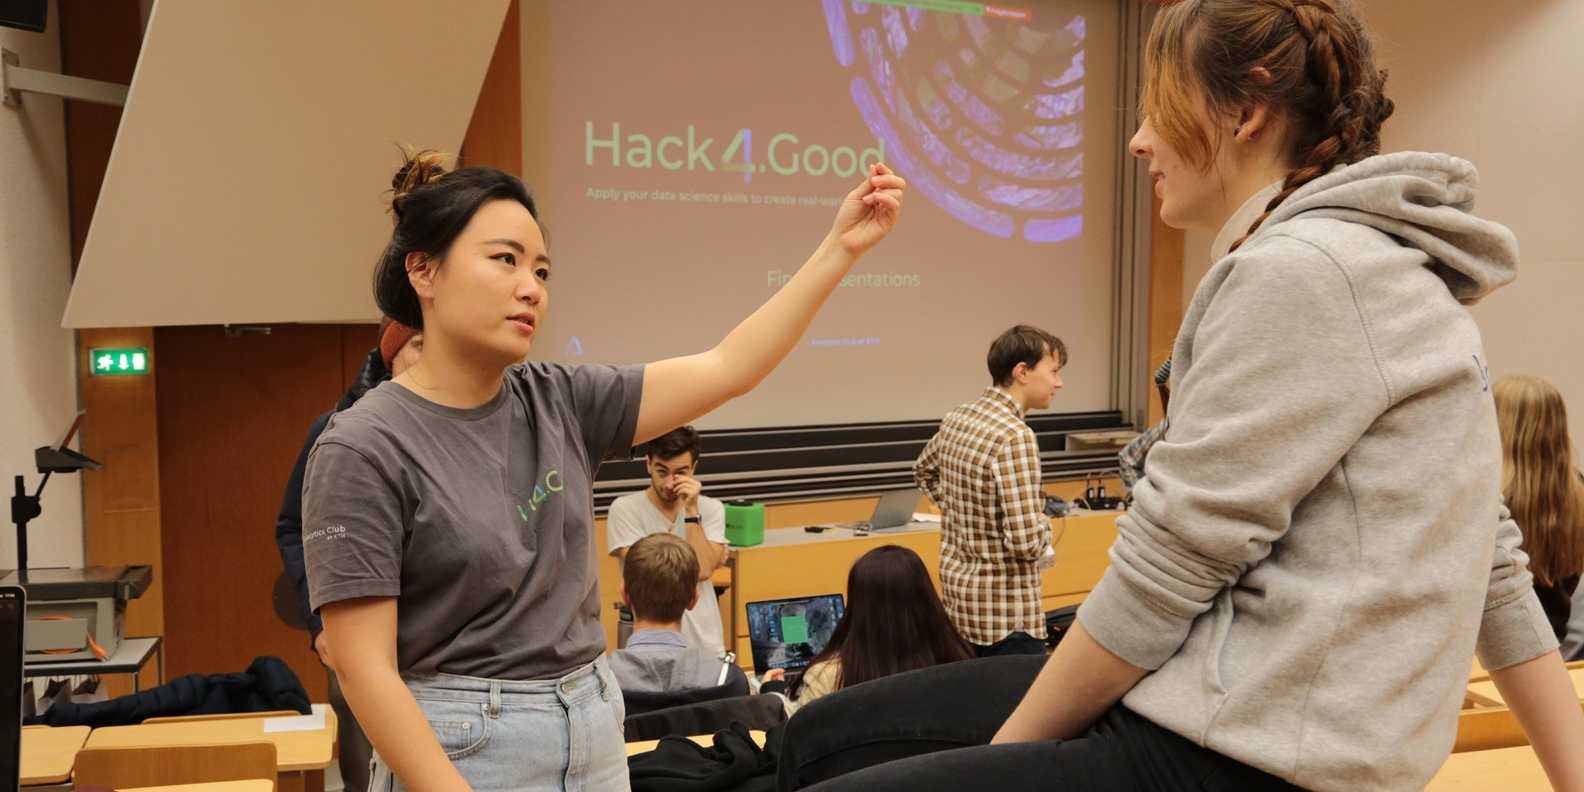 Two participants of the event Hack4Good